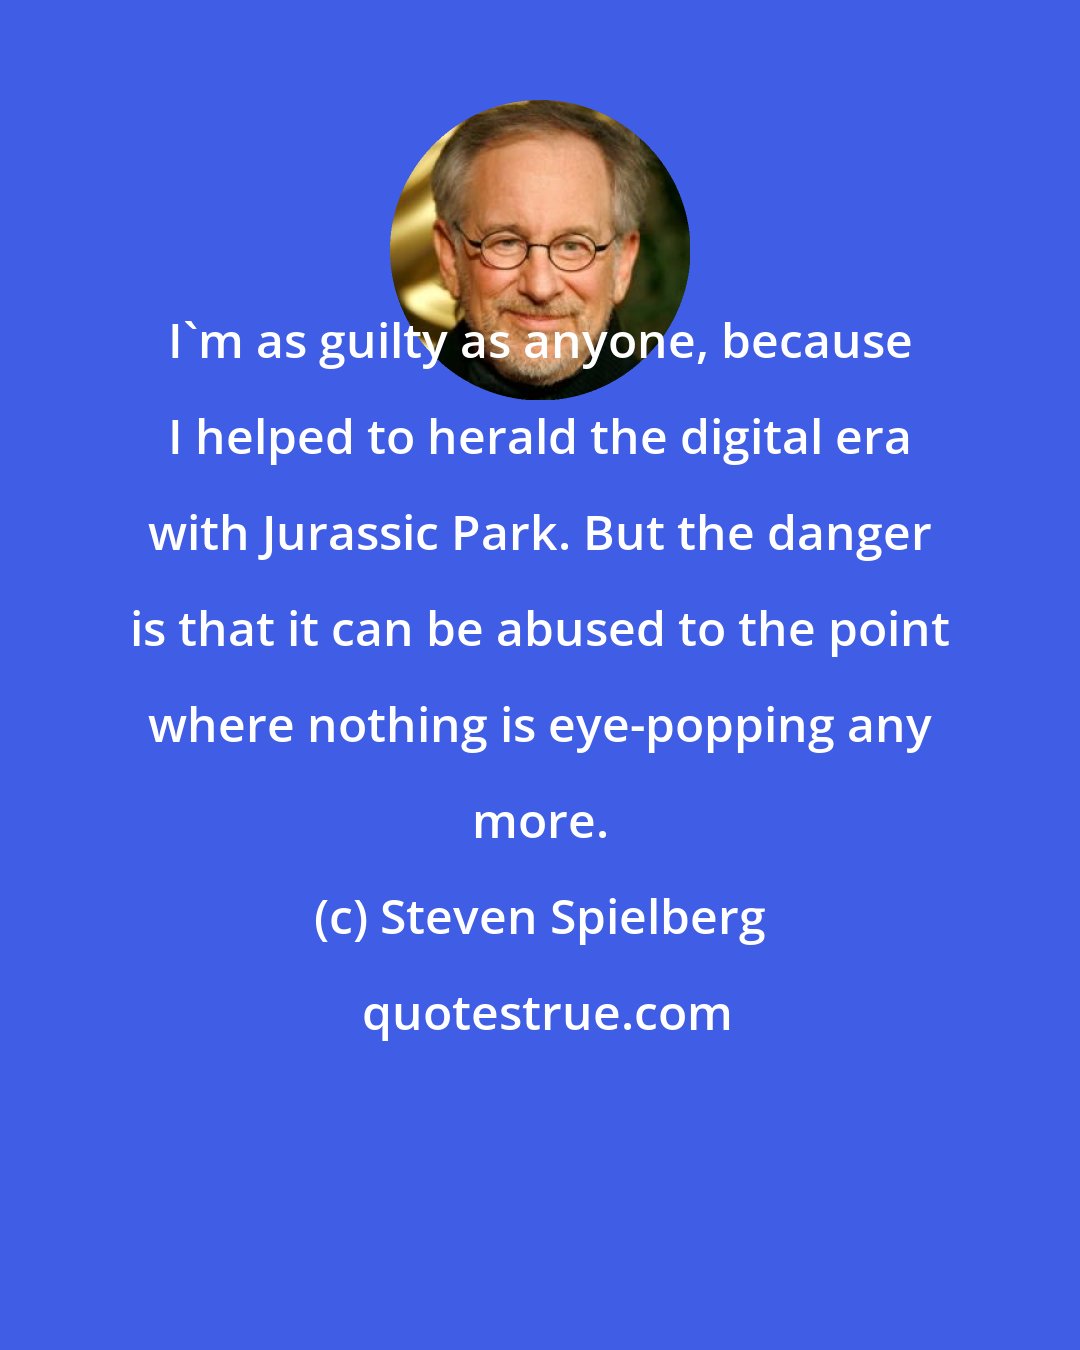 Steven Spielberg: I'm as guilty as anyone, because I helped to herald the digital era with Jurassic Park. But the danger is that it can be abused to the point where nothing is eye-popping any more.